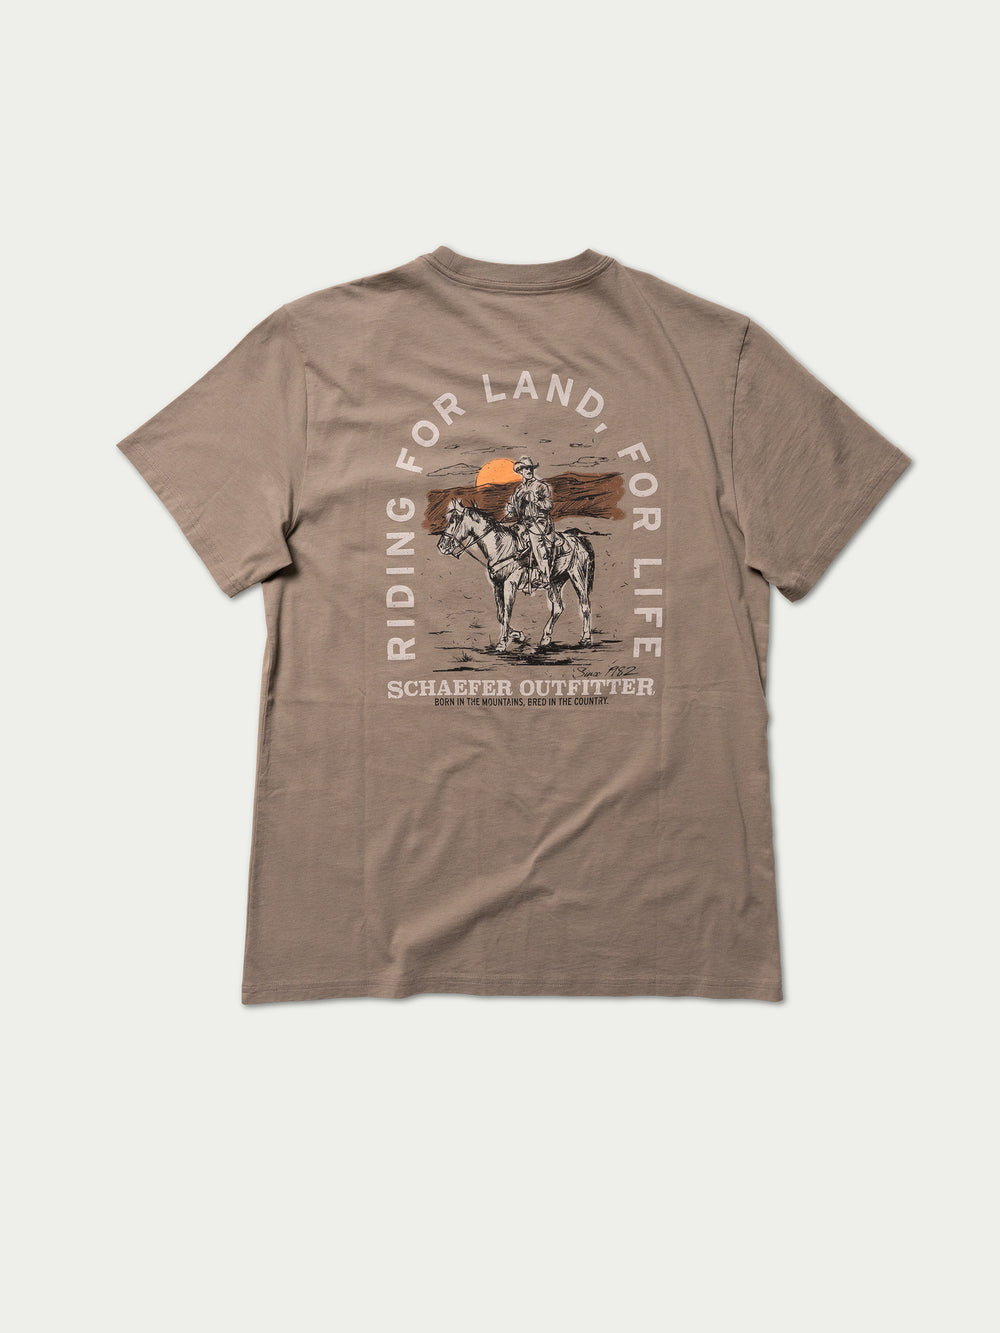 ON THE PLAINS POCKET TEE - Schaefer Outfitter